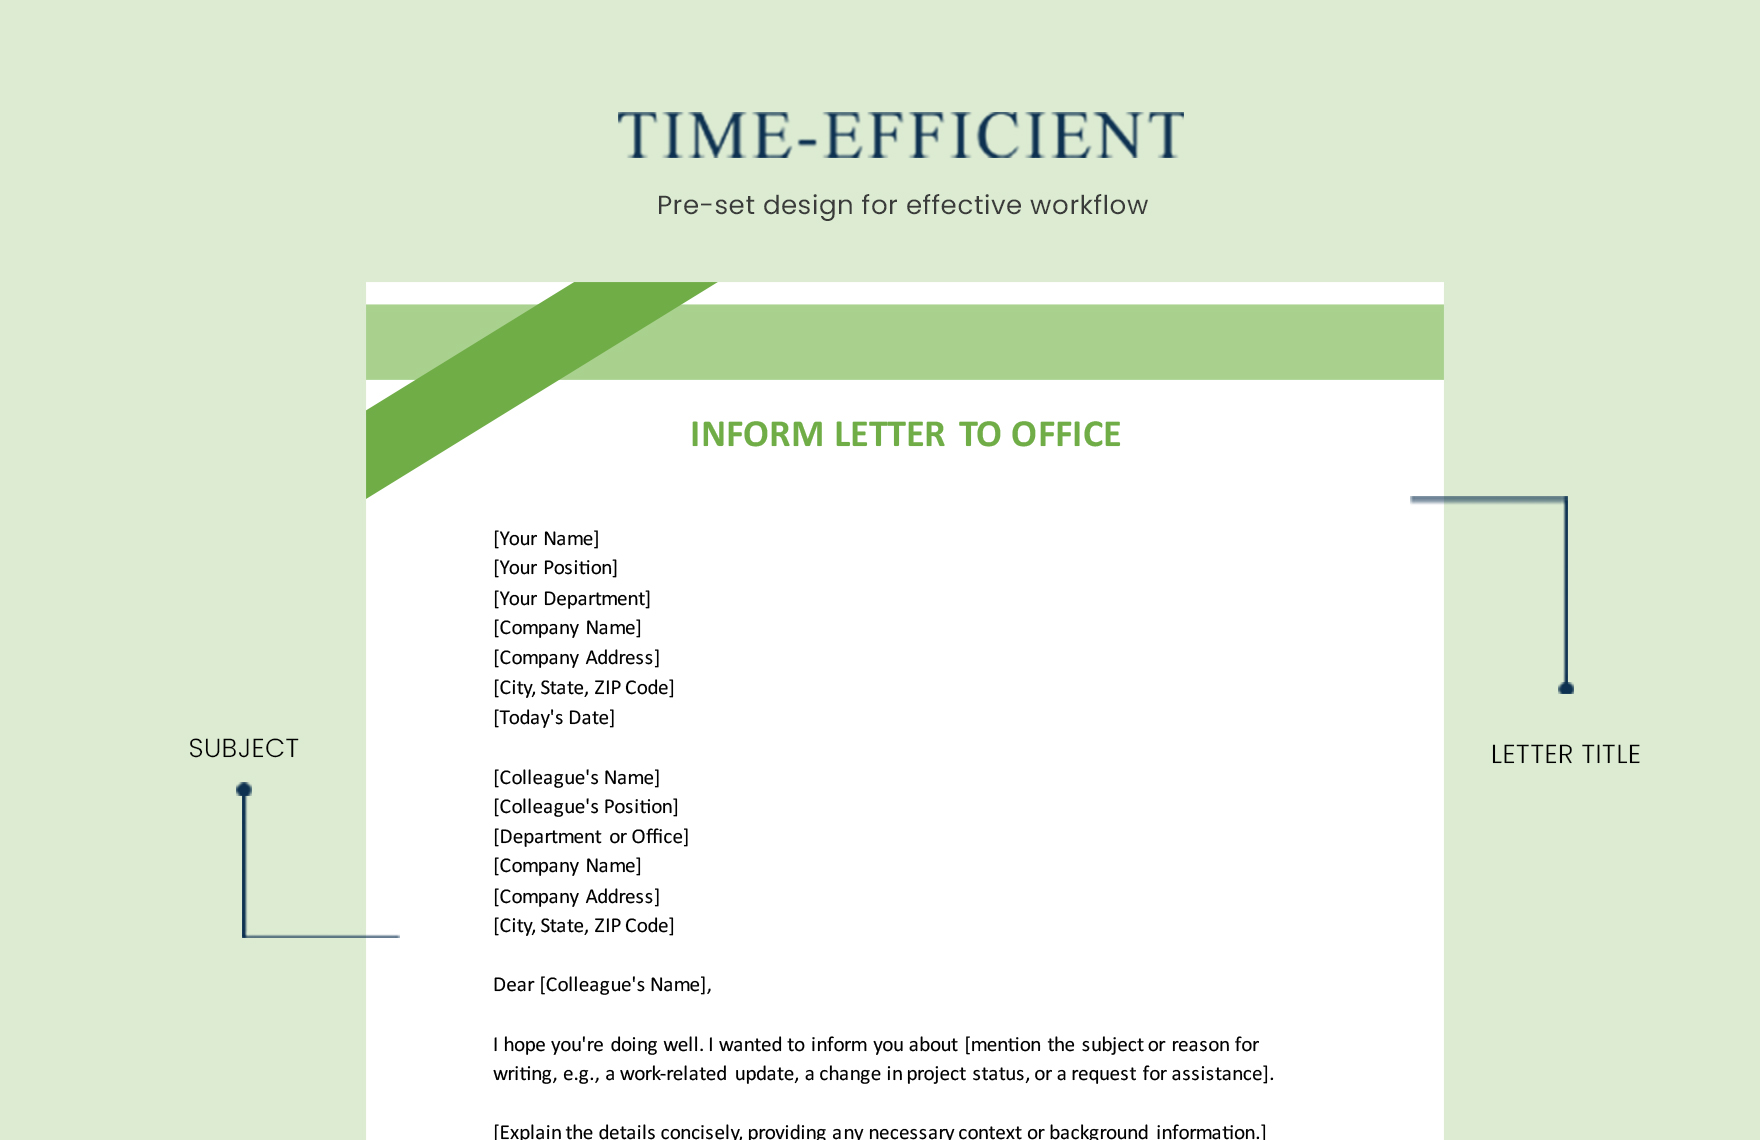 Inform Letter To Office